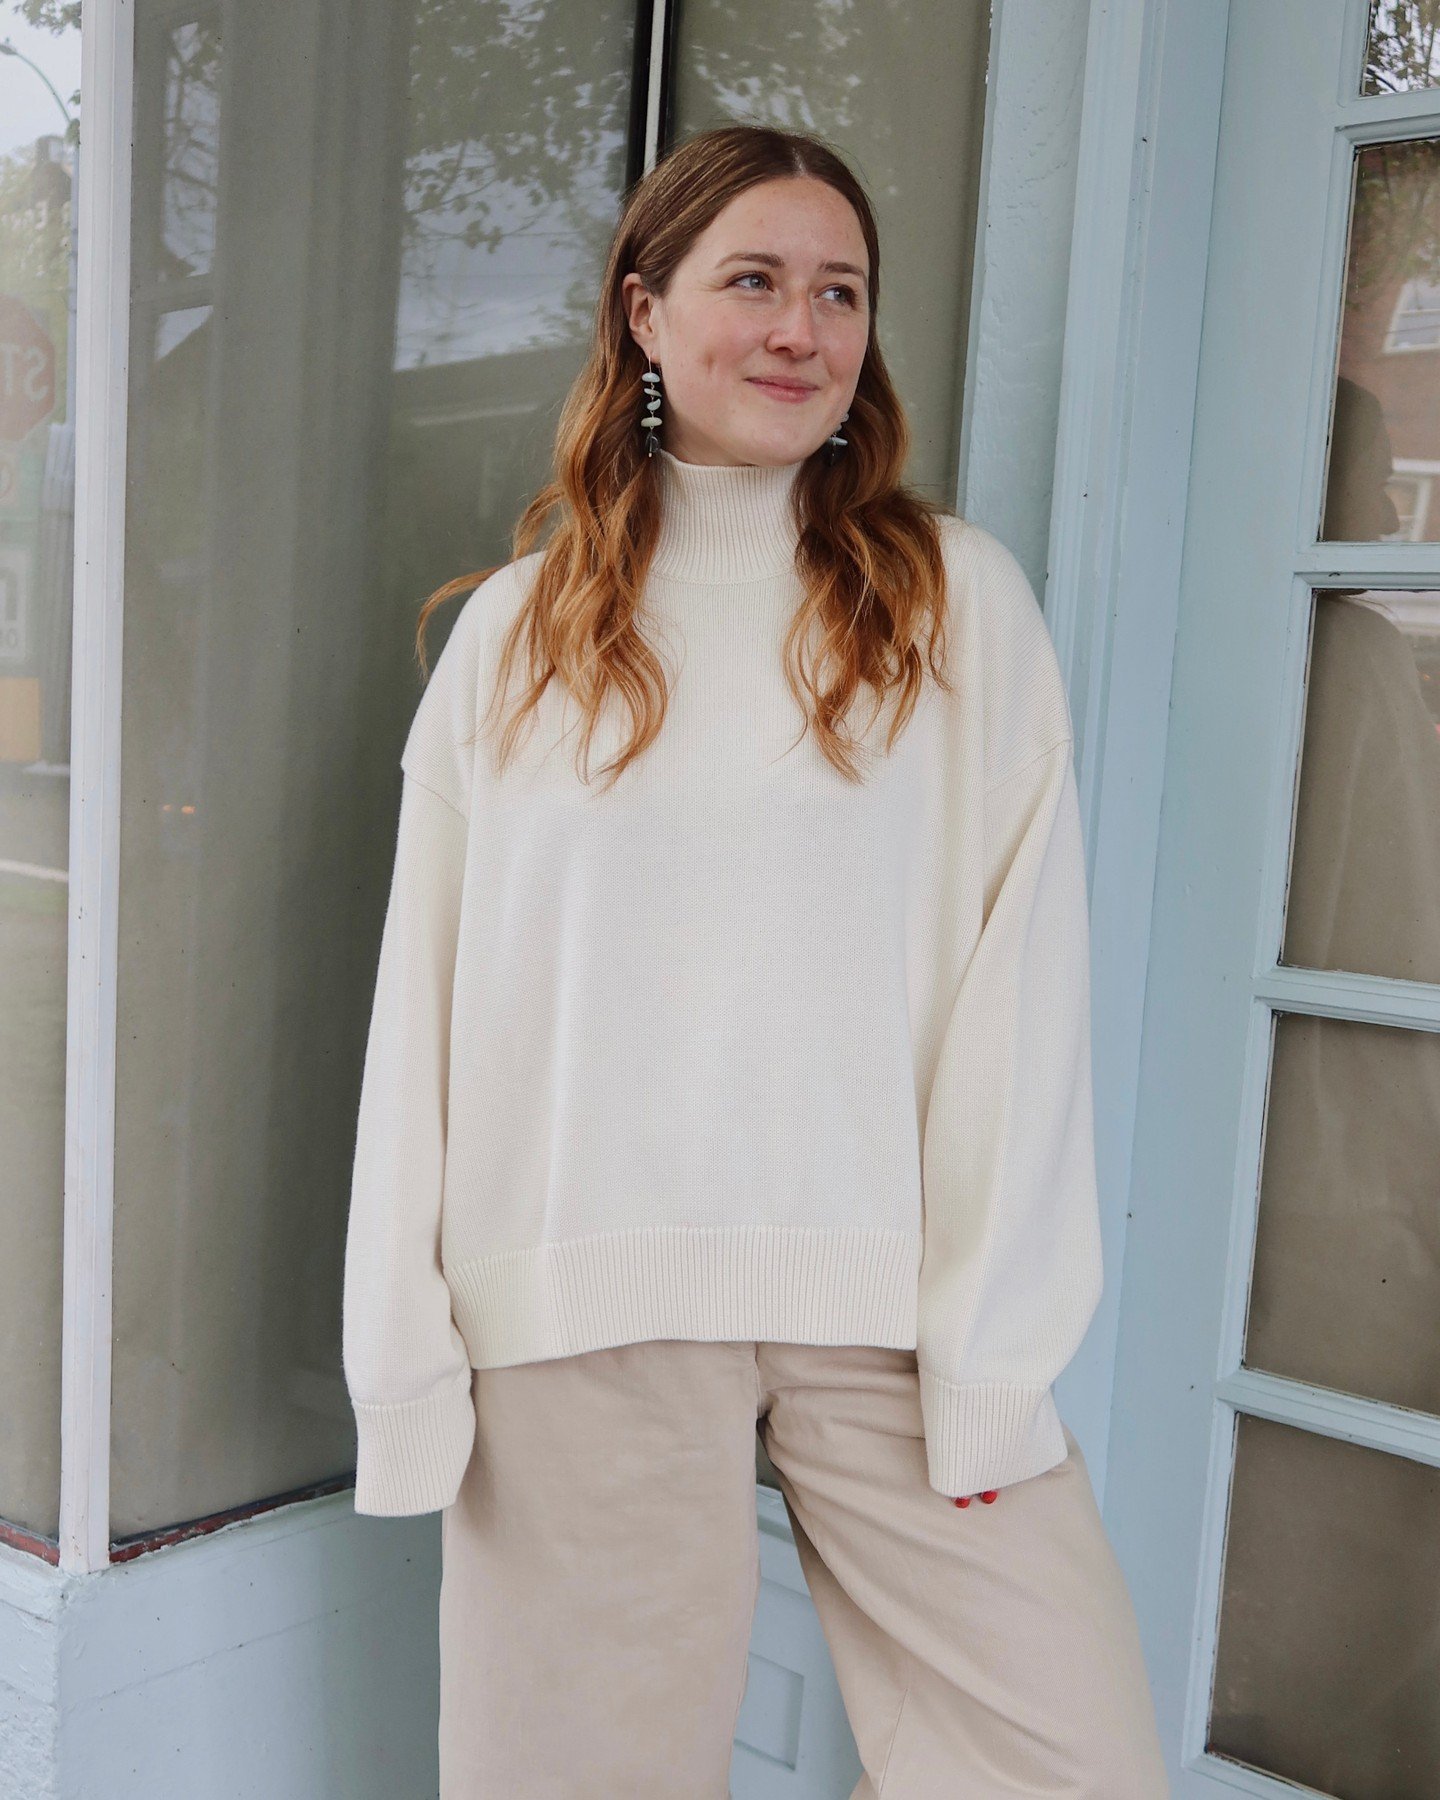 The Suda Knit Turtleneck in Parchment from @studionicholson - knit in a merino/cotton blend.